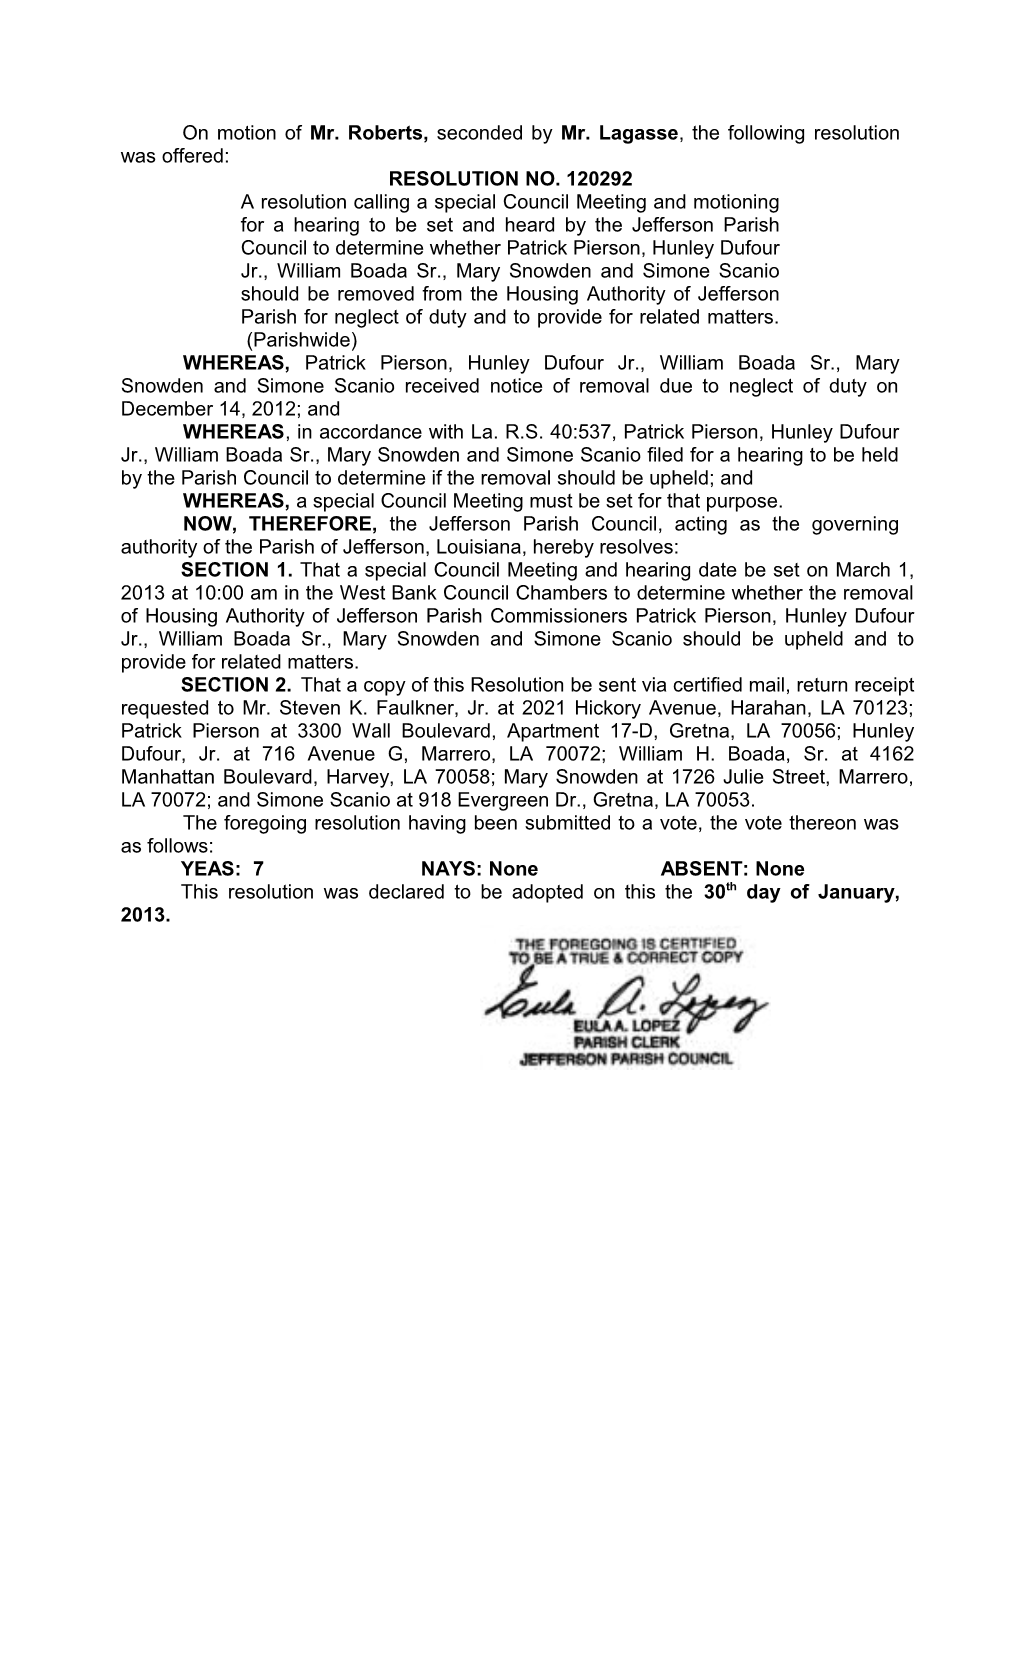 On Motion of Mr. Roberts, Seconded by Mr. Lagasse , the Following Resolution Was Offered